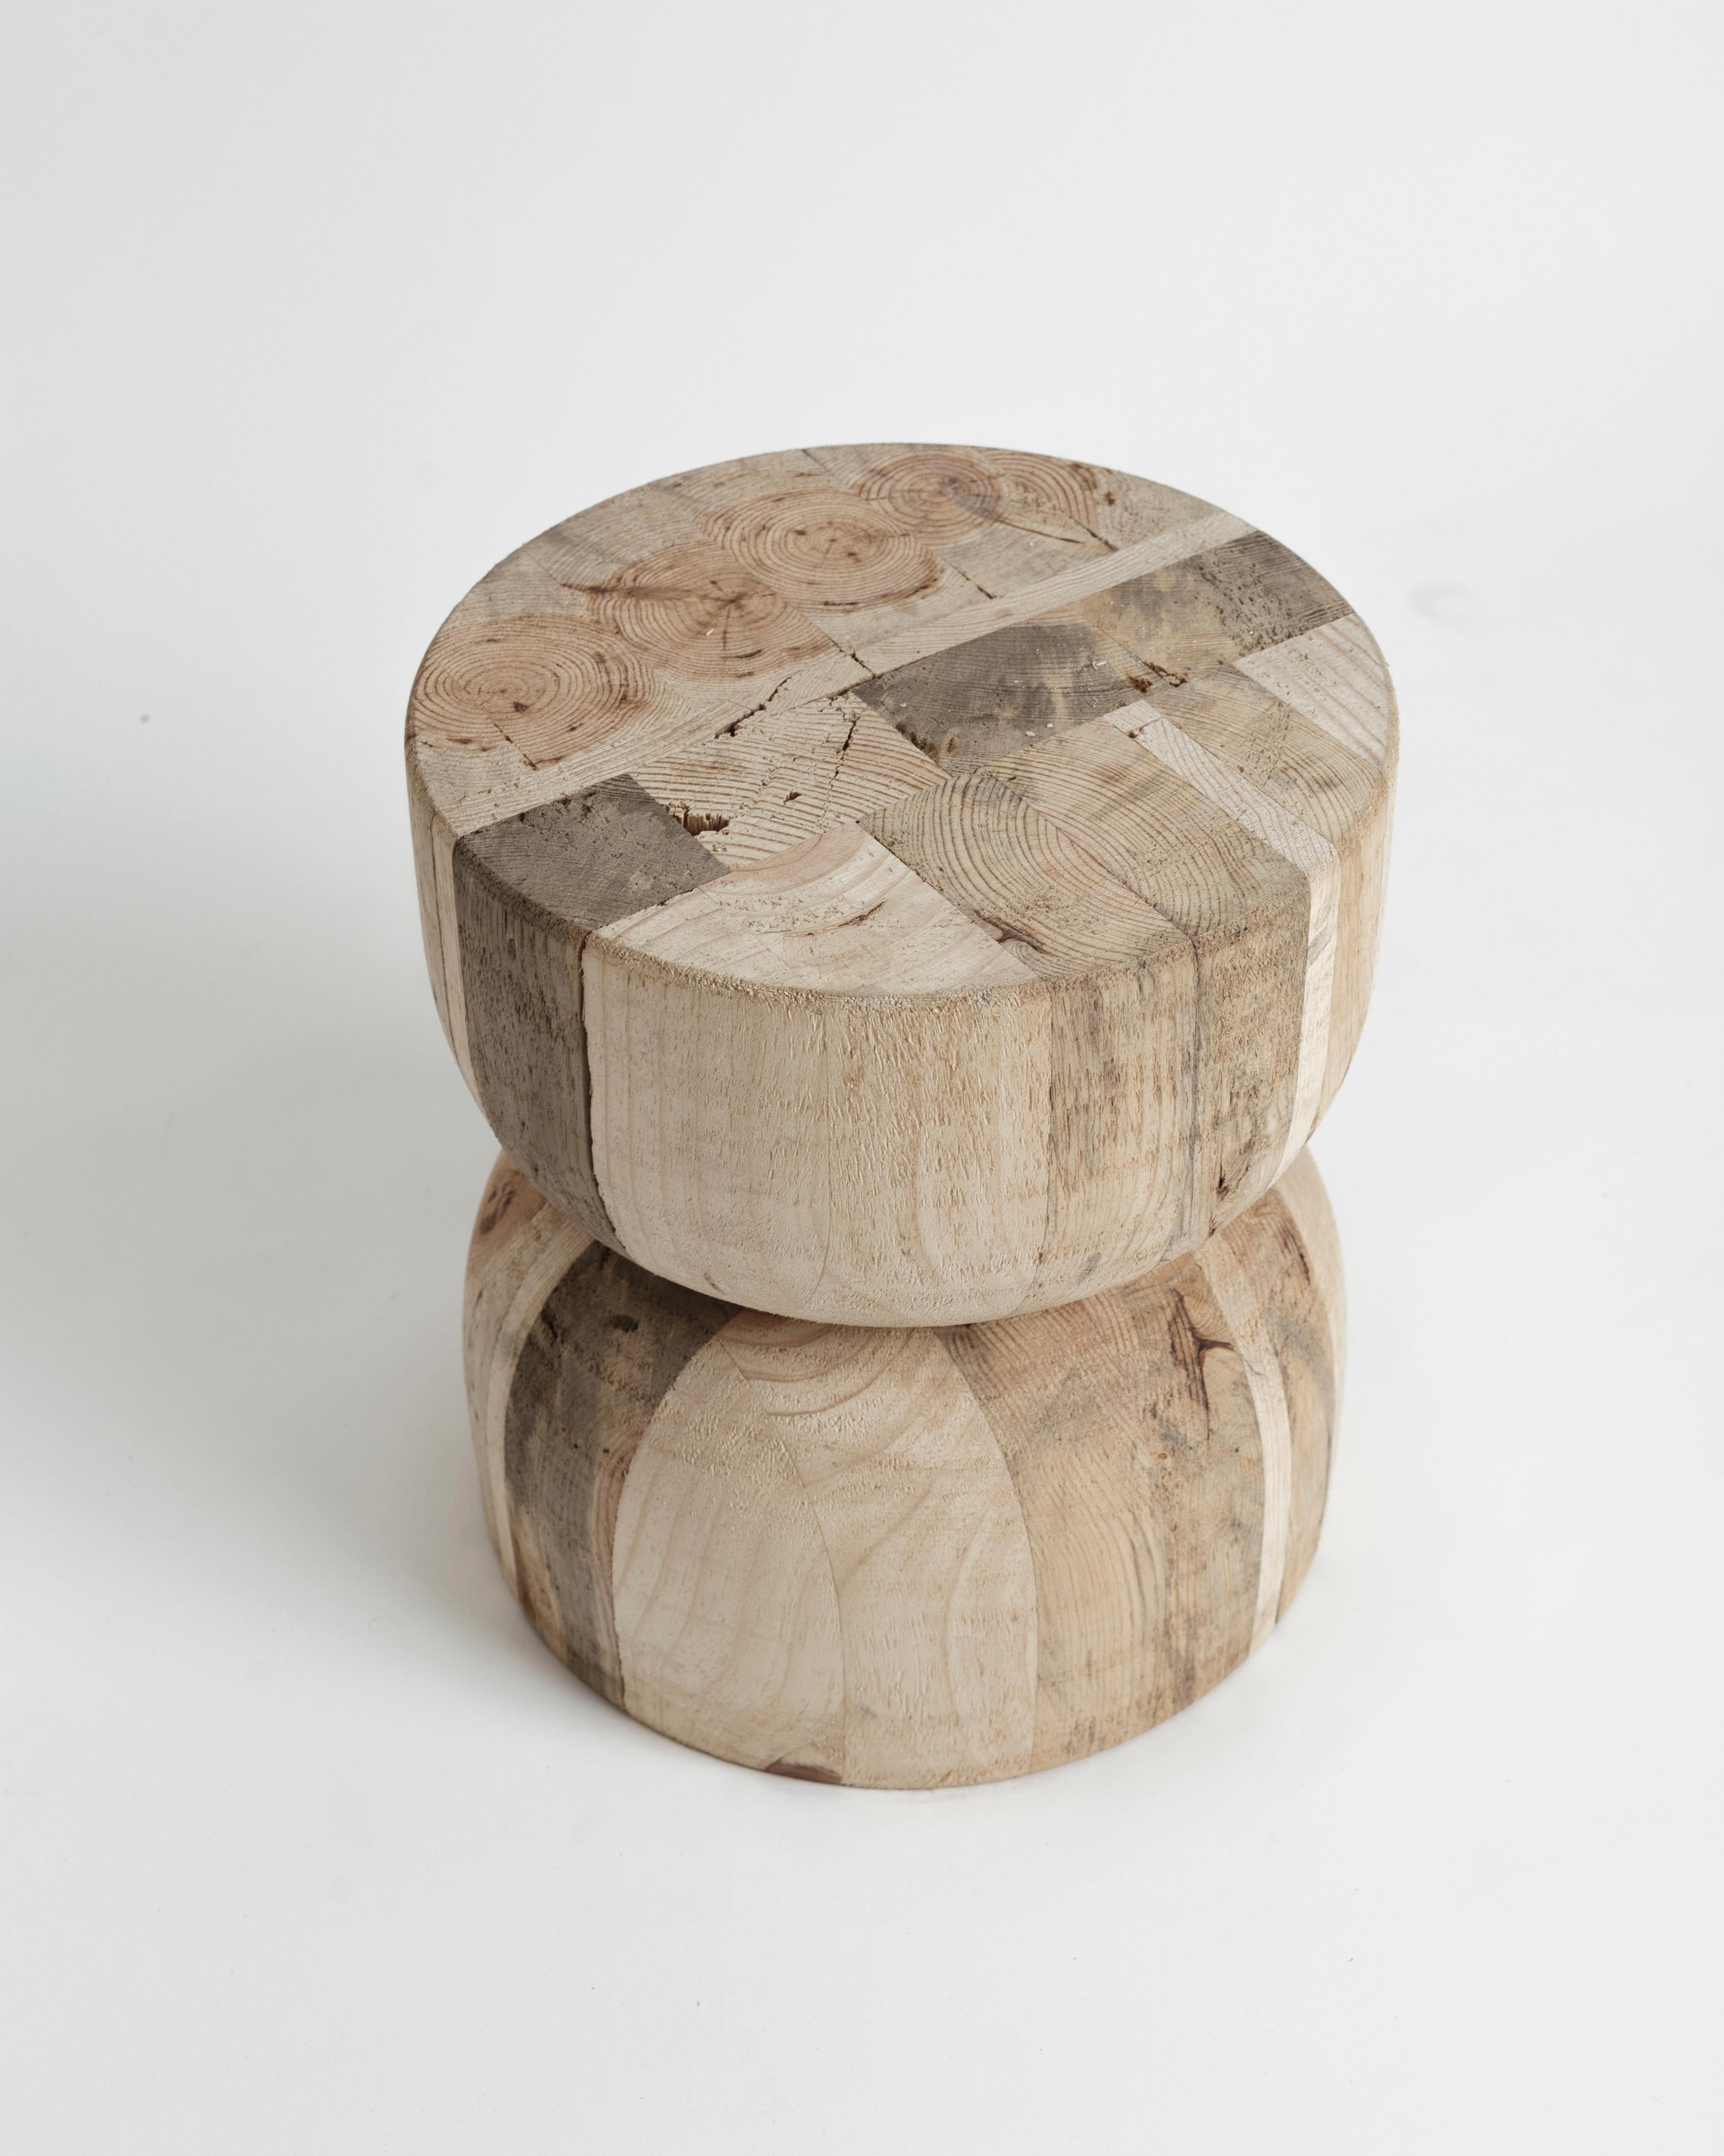 Minimalist NERU TOTEM STOOL 2, by Rebeca Cors For Sale